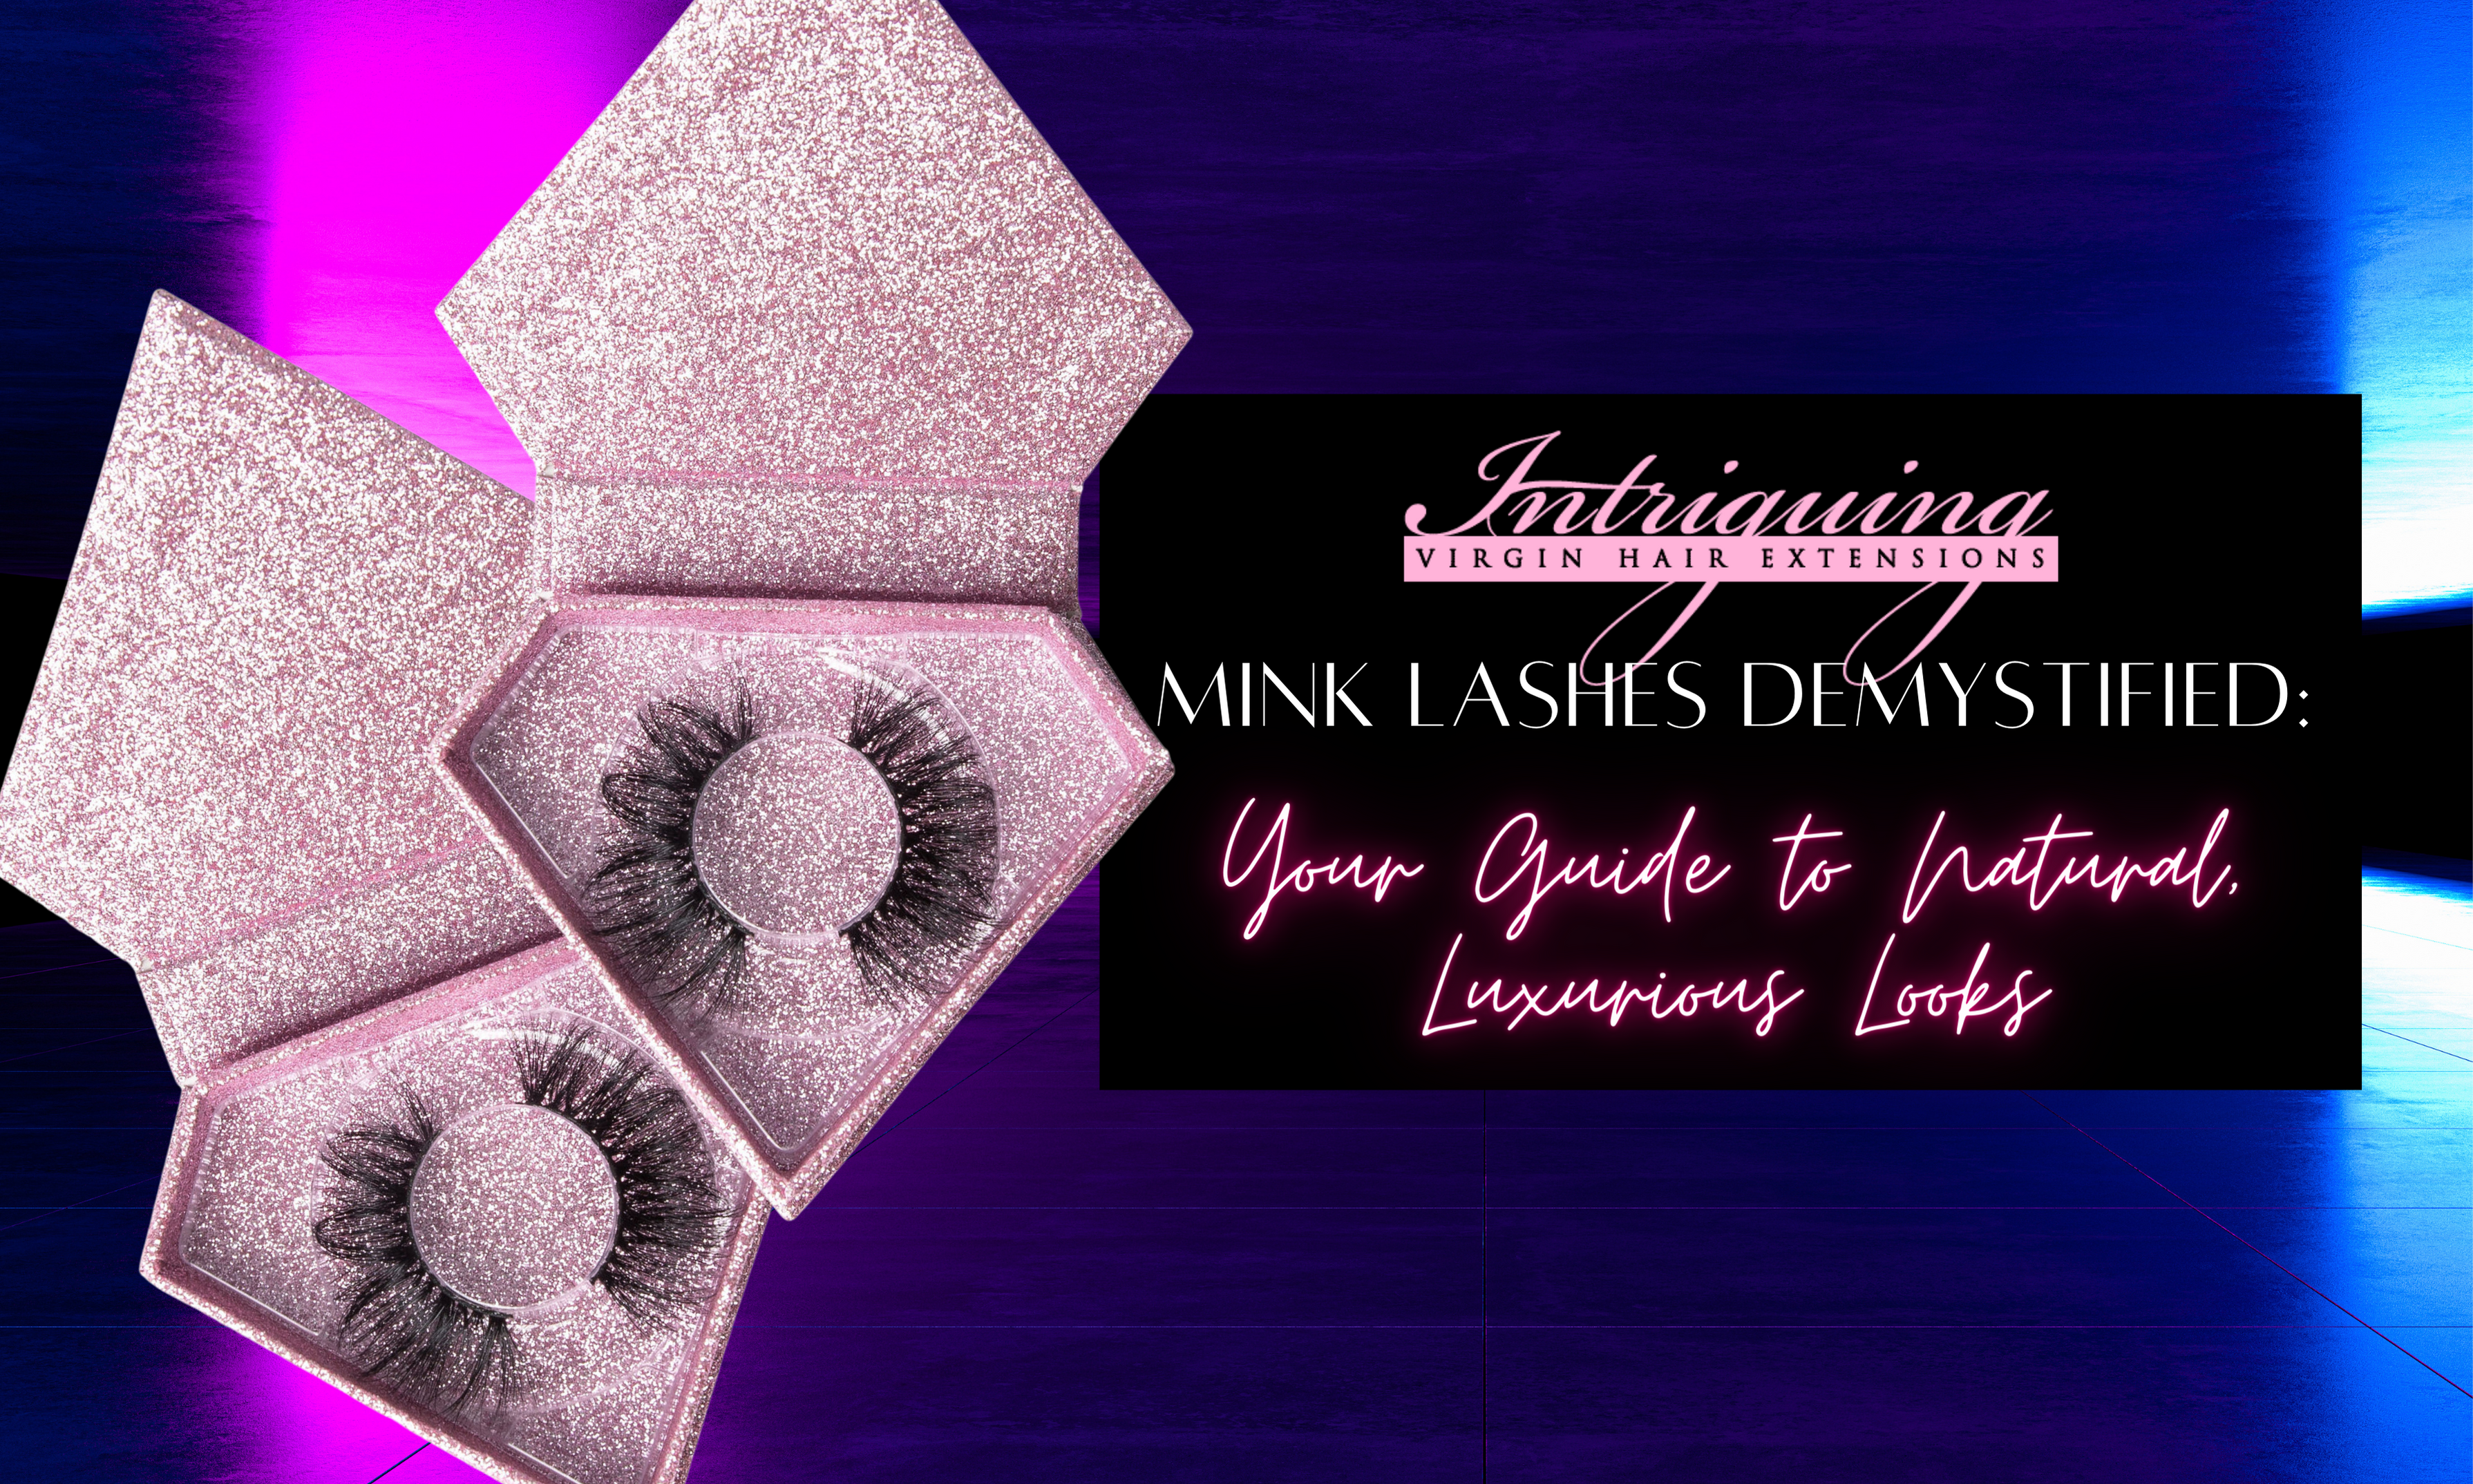 Mink Lashes Demystified: Your Guide to Natural, Luxurious Looks